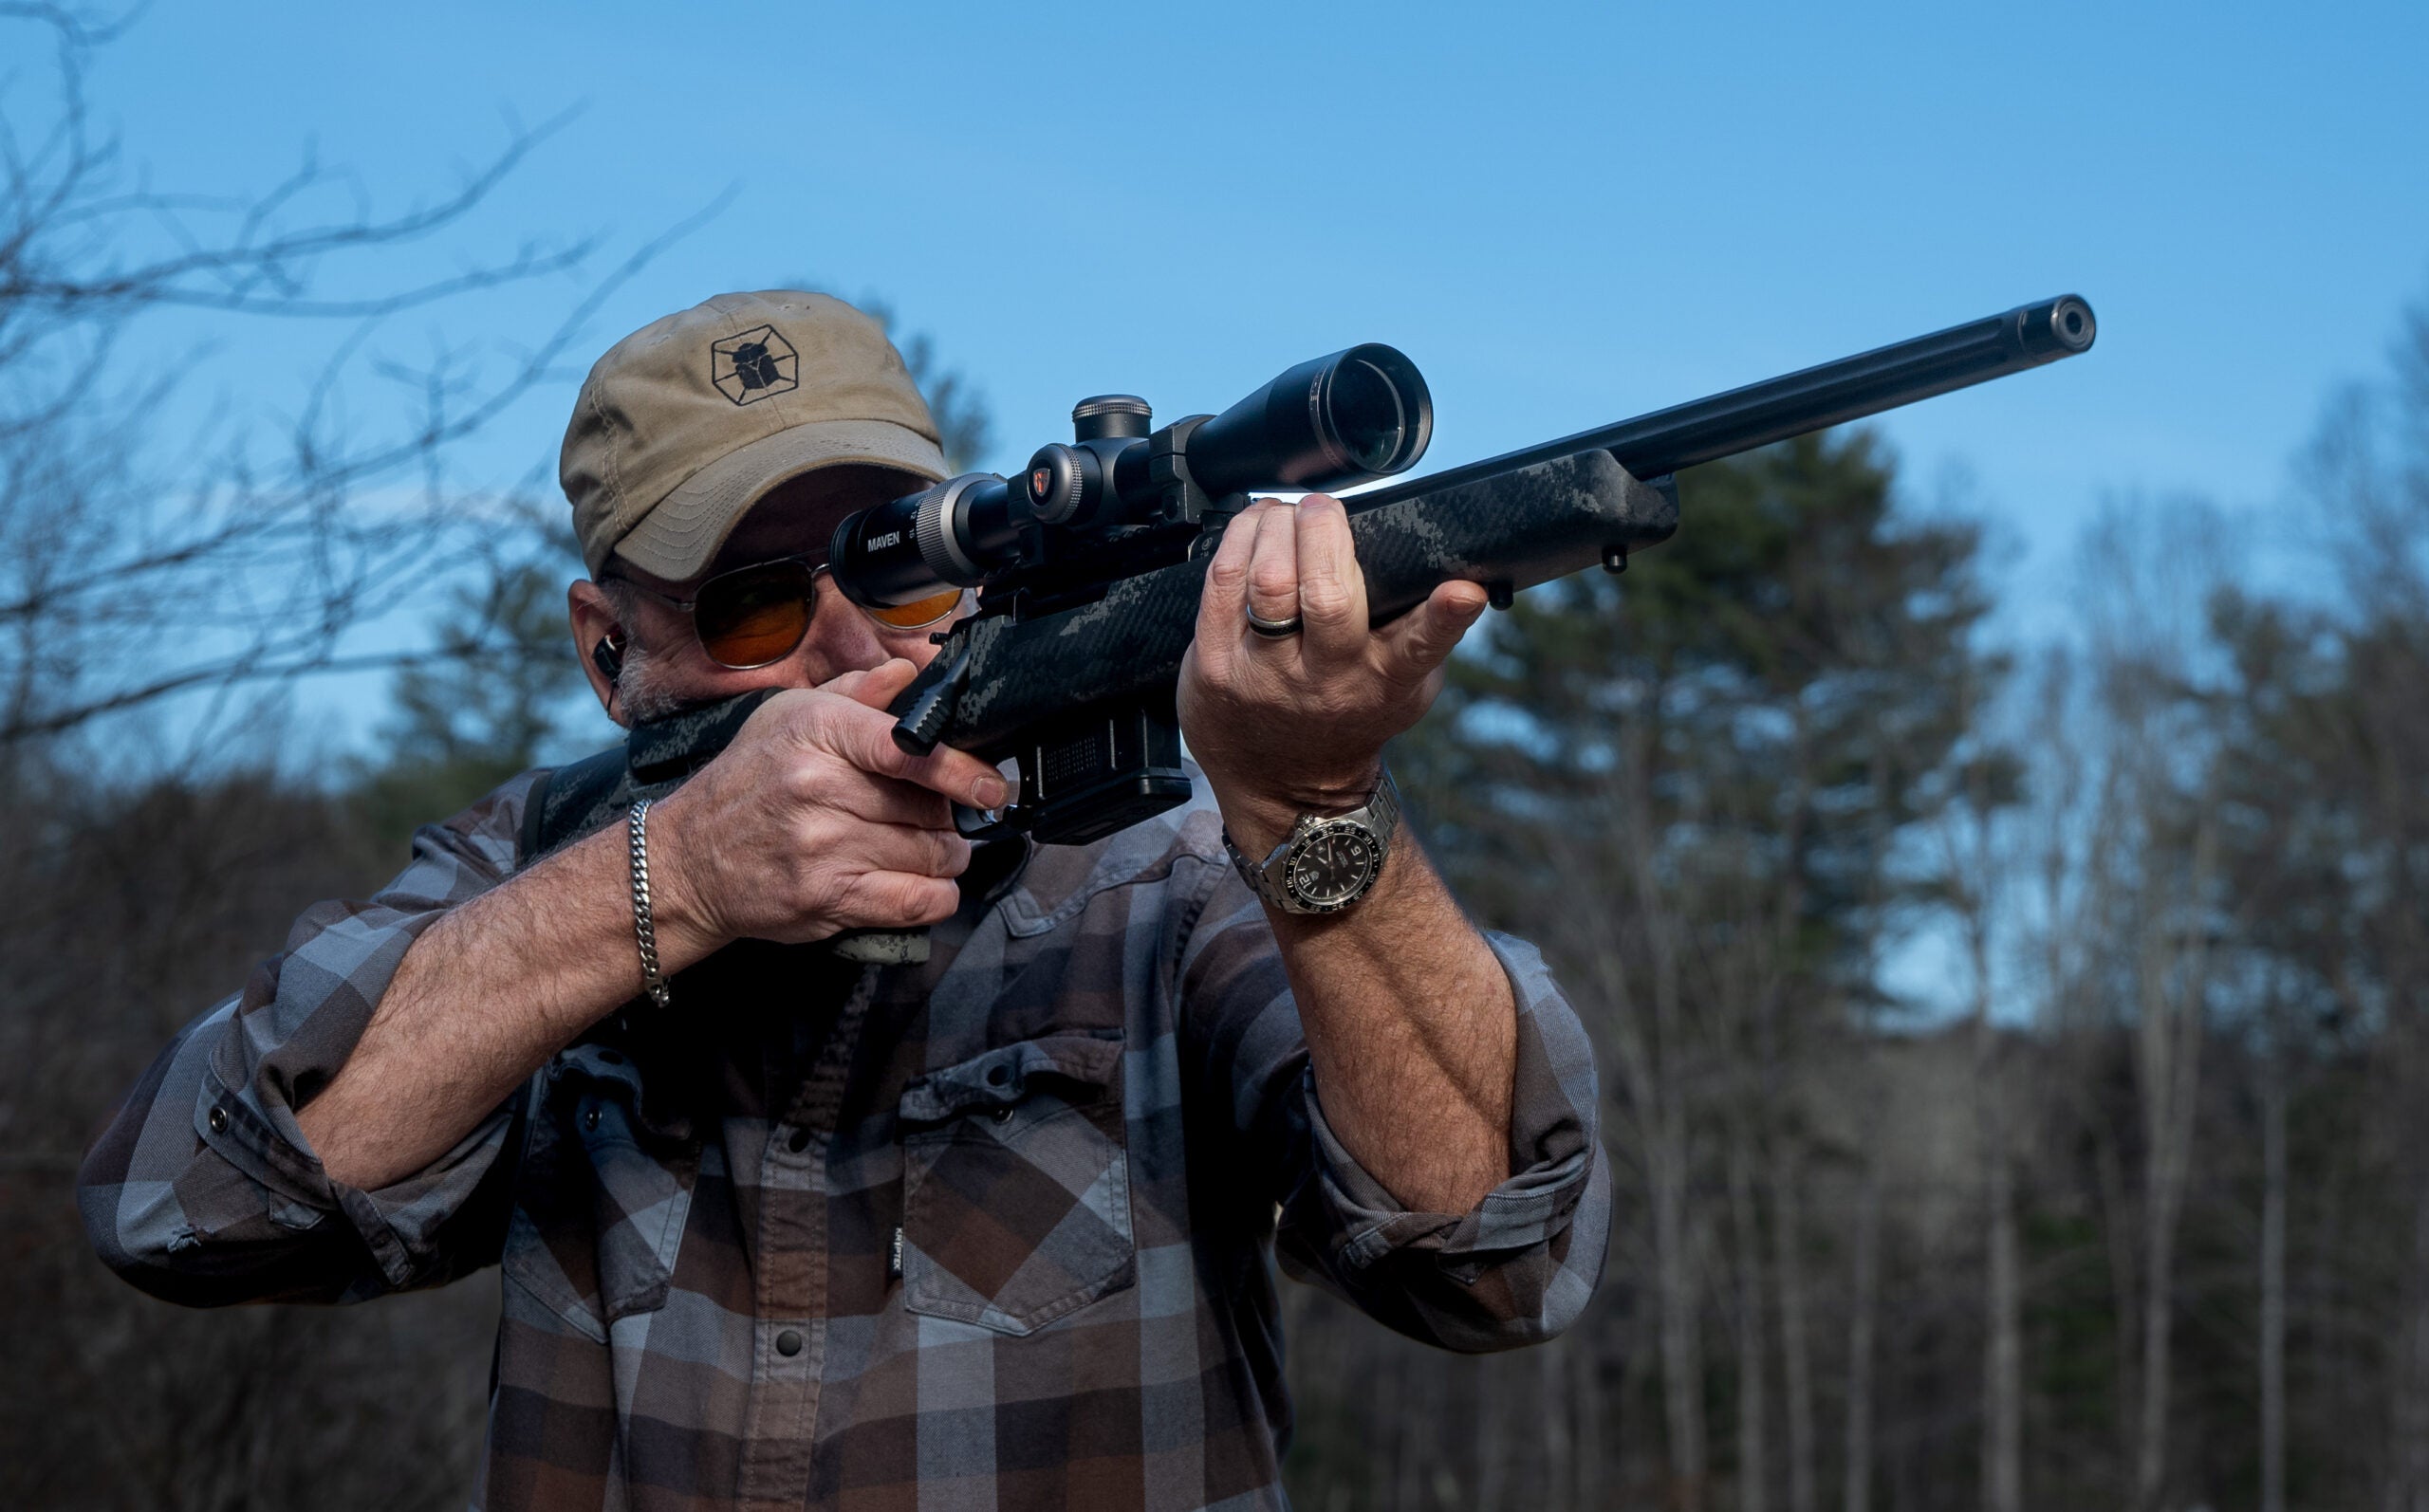 Shooter test fires the Aero Precision SOLUS Hunter rifle offhand